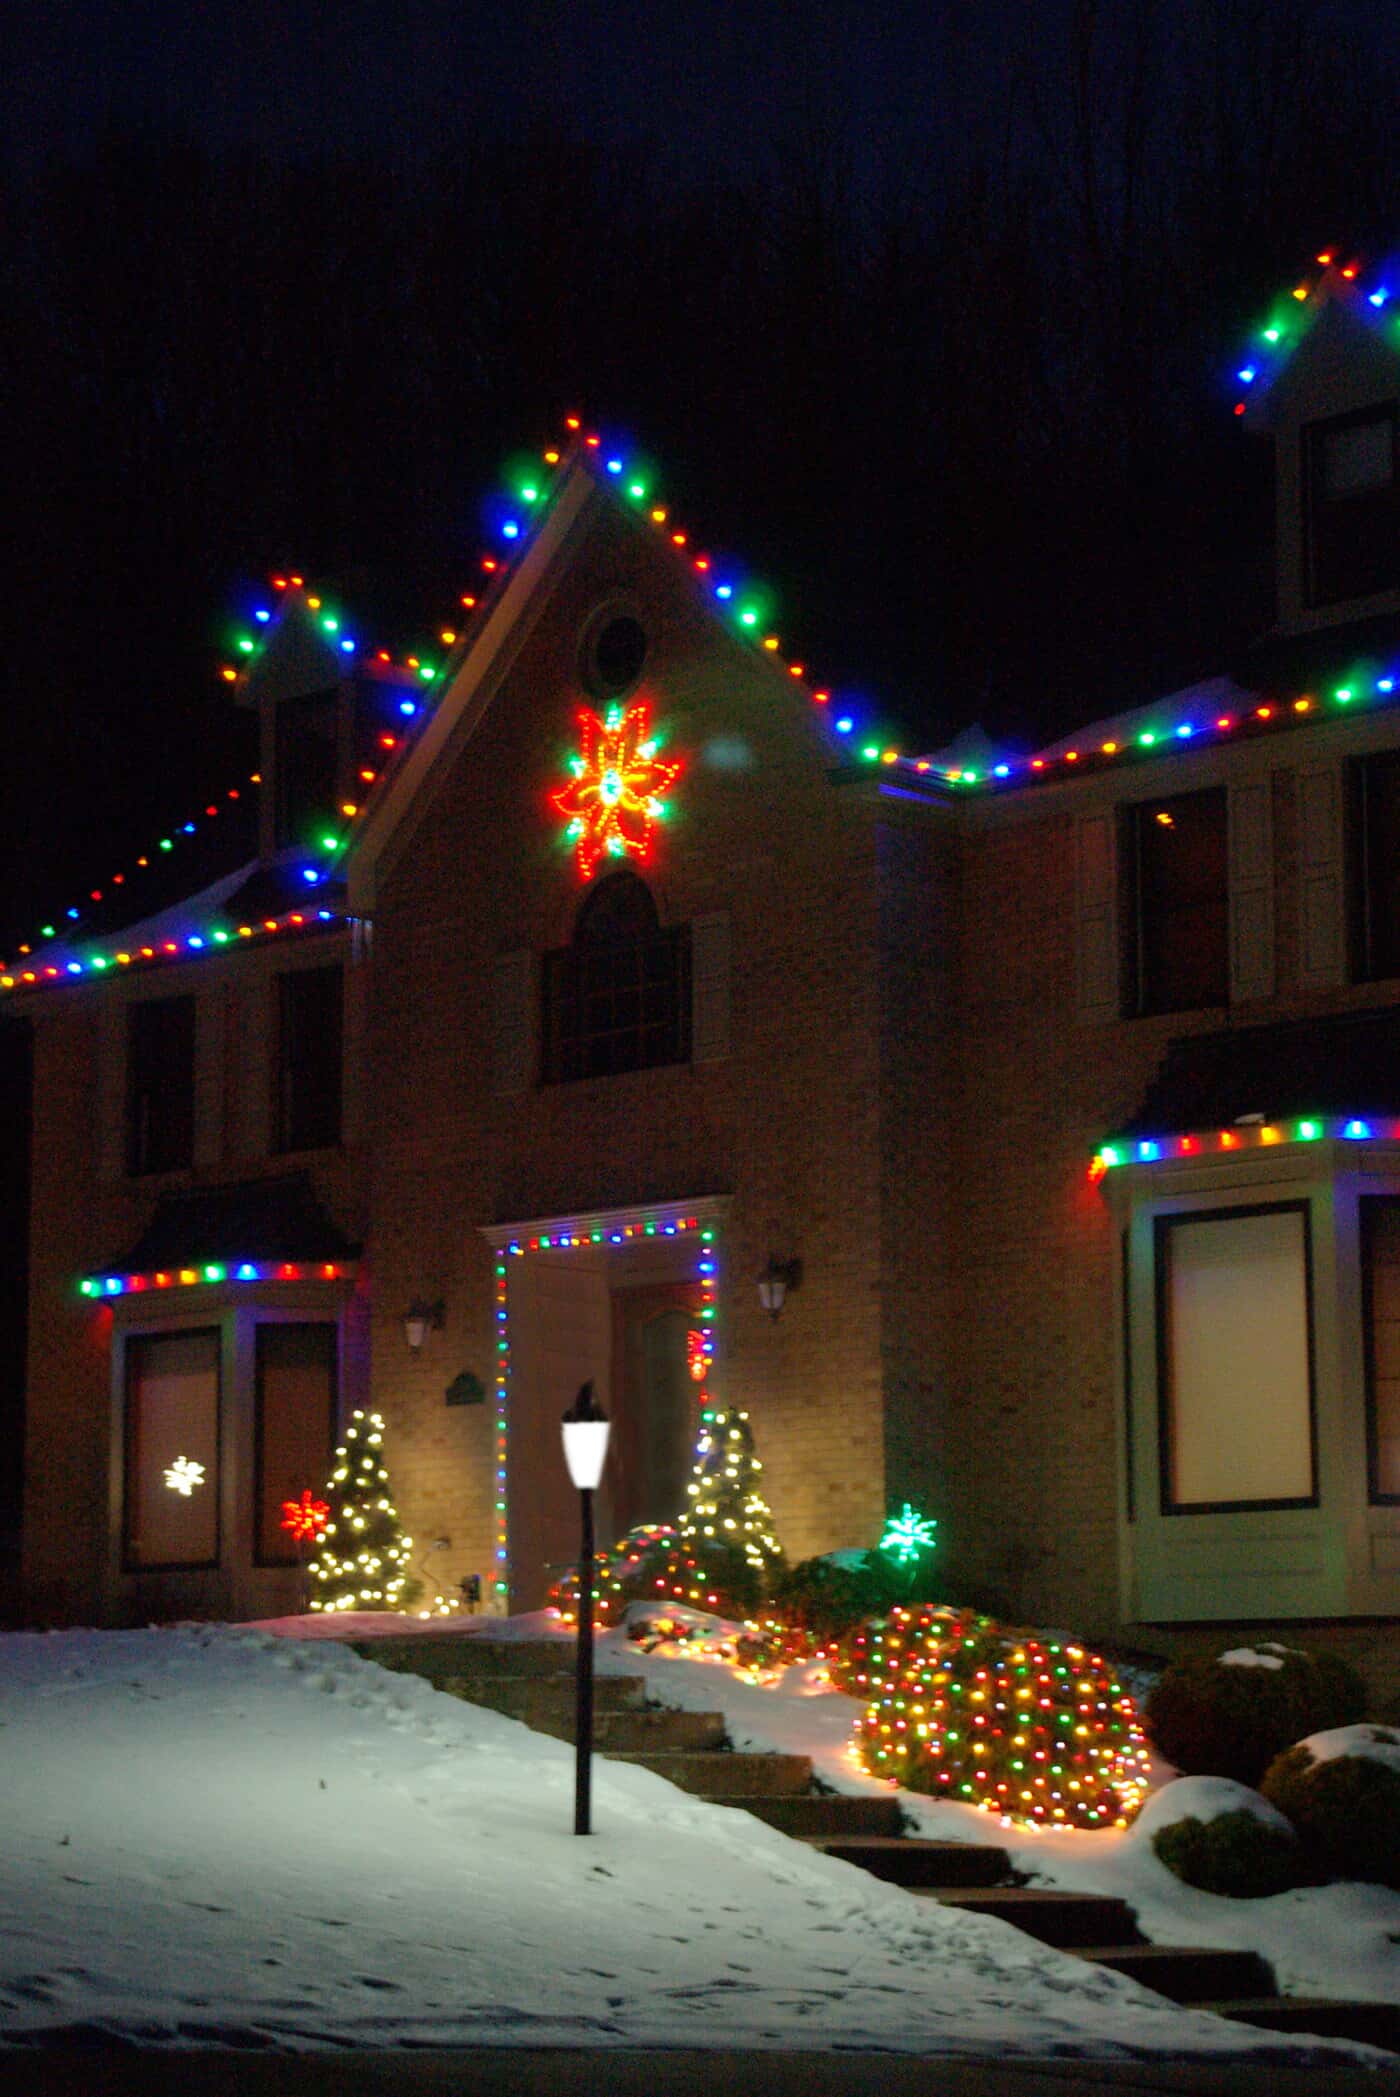 Home with holiday lighting and decorations